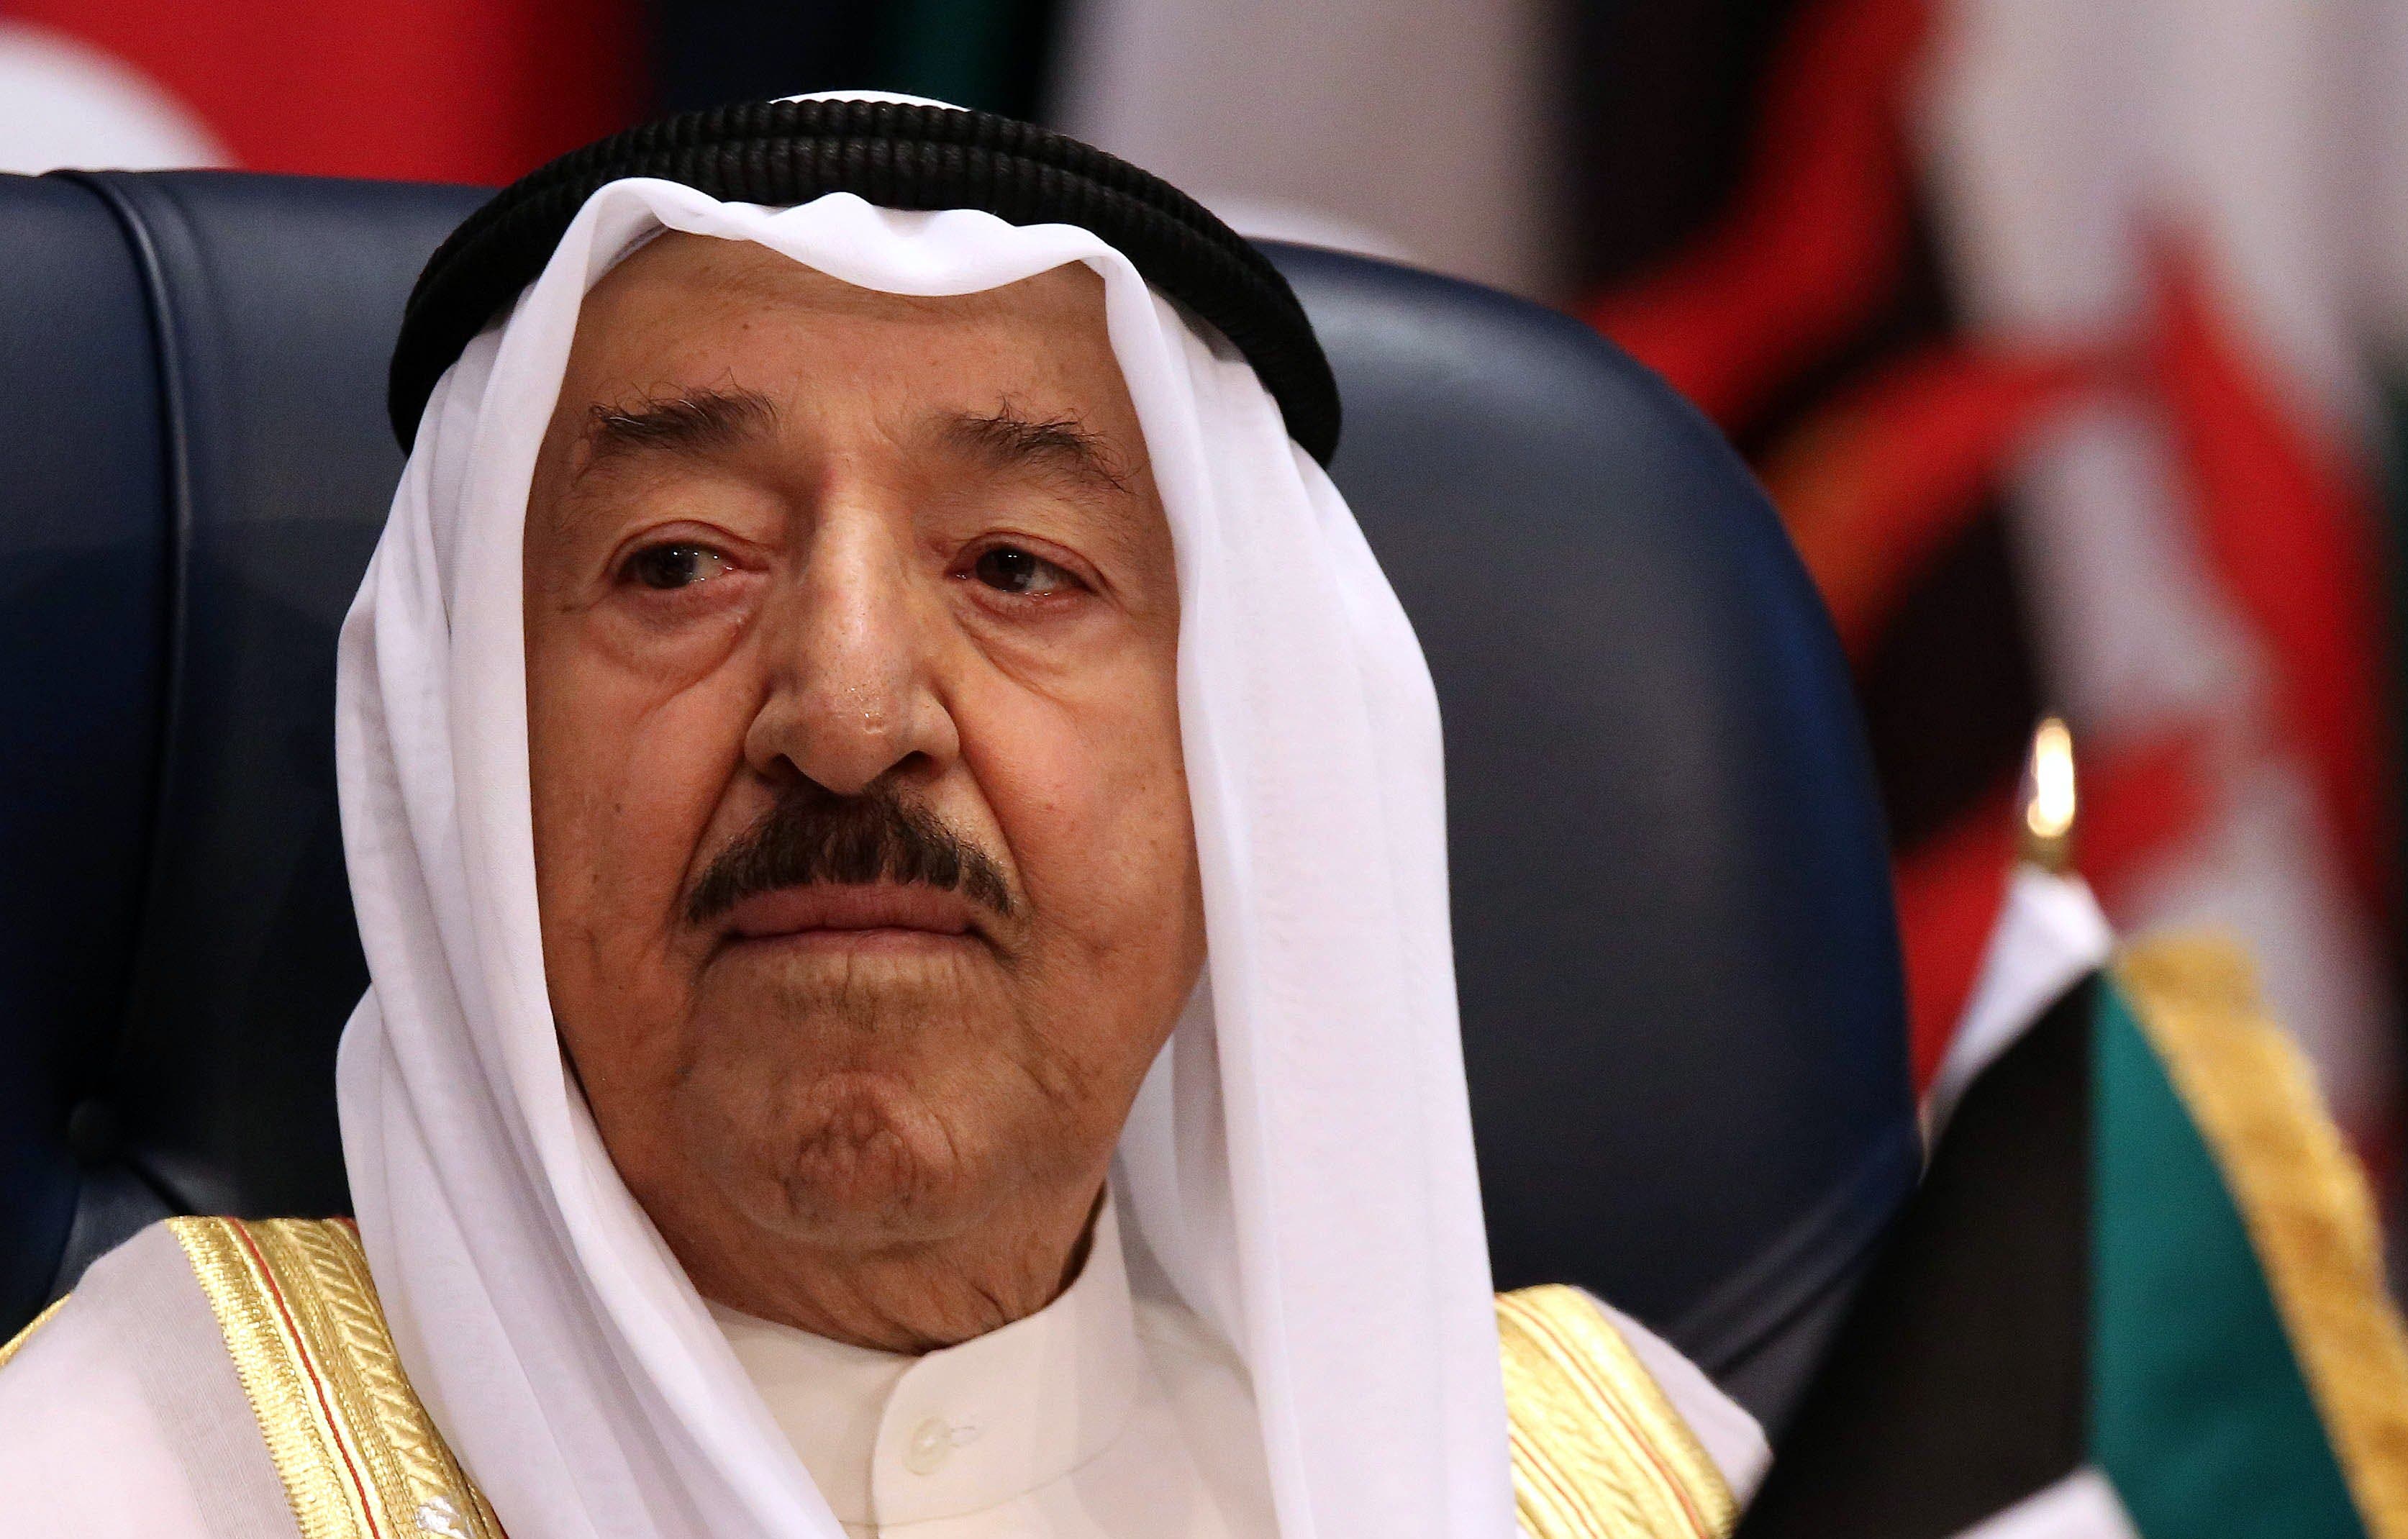 Emir of Kuwait Sheikh Sabah al-Ahmad al-Jaber al-Sabah attends the opening of the 42nd Session of the Council of Foreign Ministers (CFM) of the Organization of Islamic Corporation (OIC) at Bayan palace in Kuwait City on May 27, 2015. (AFP)